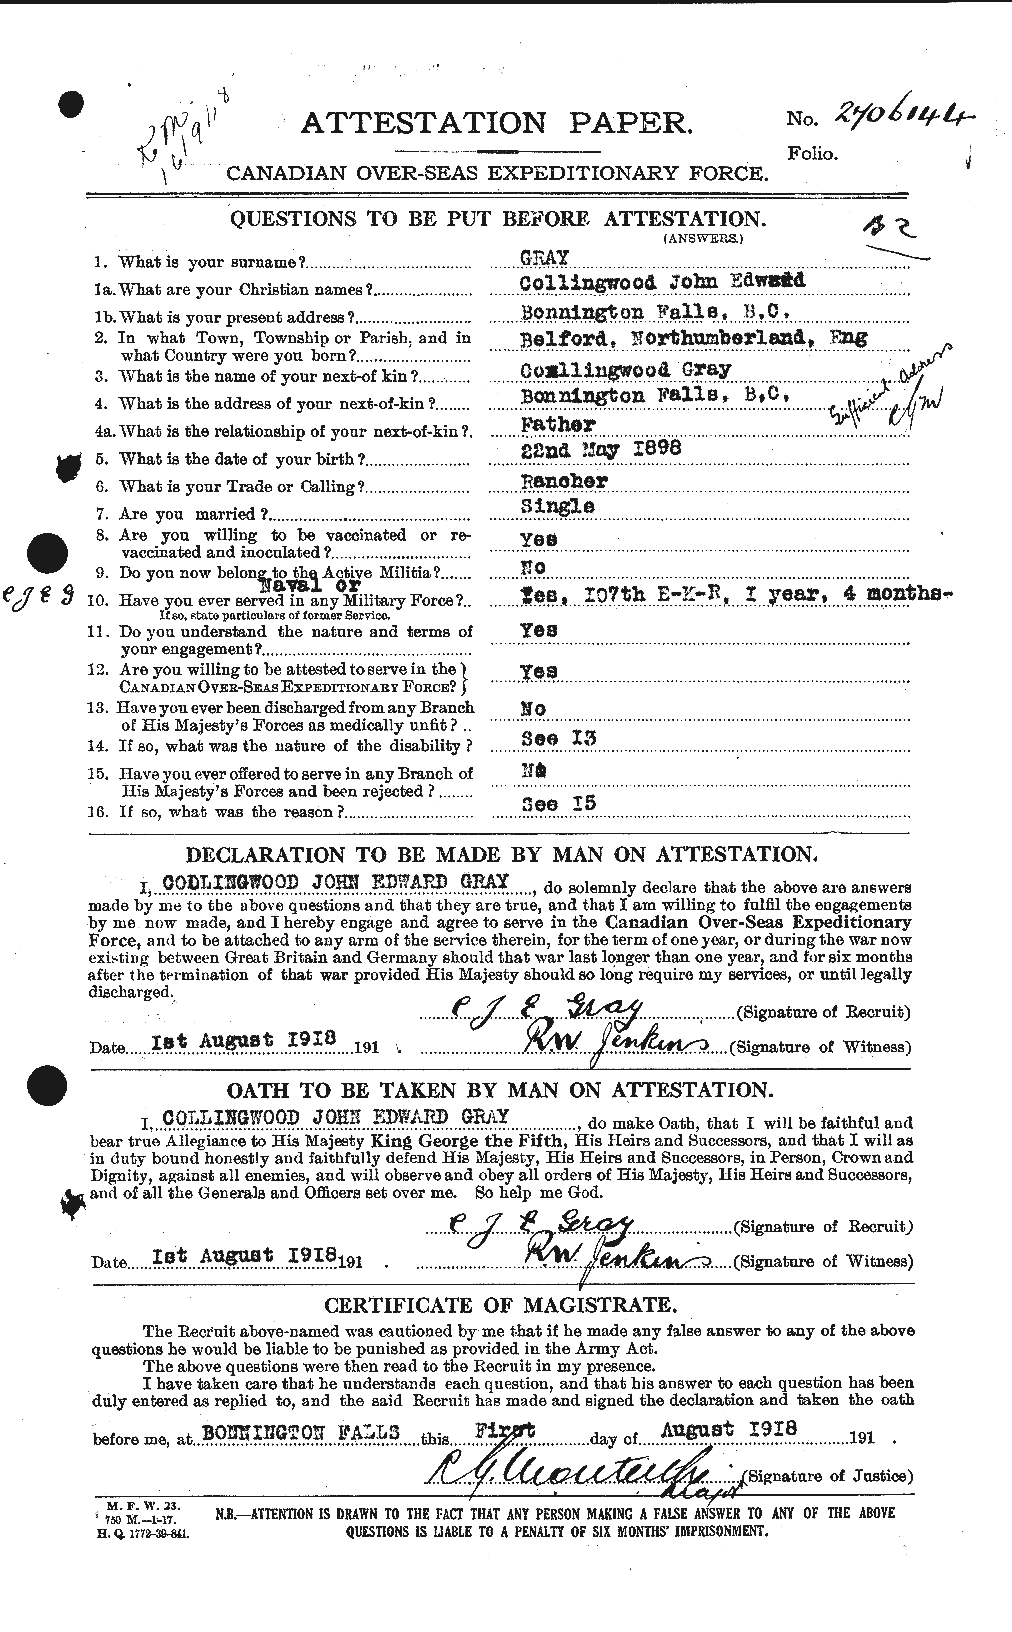 Personnel Records of the First World War - CEF 361461a